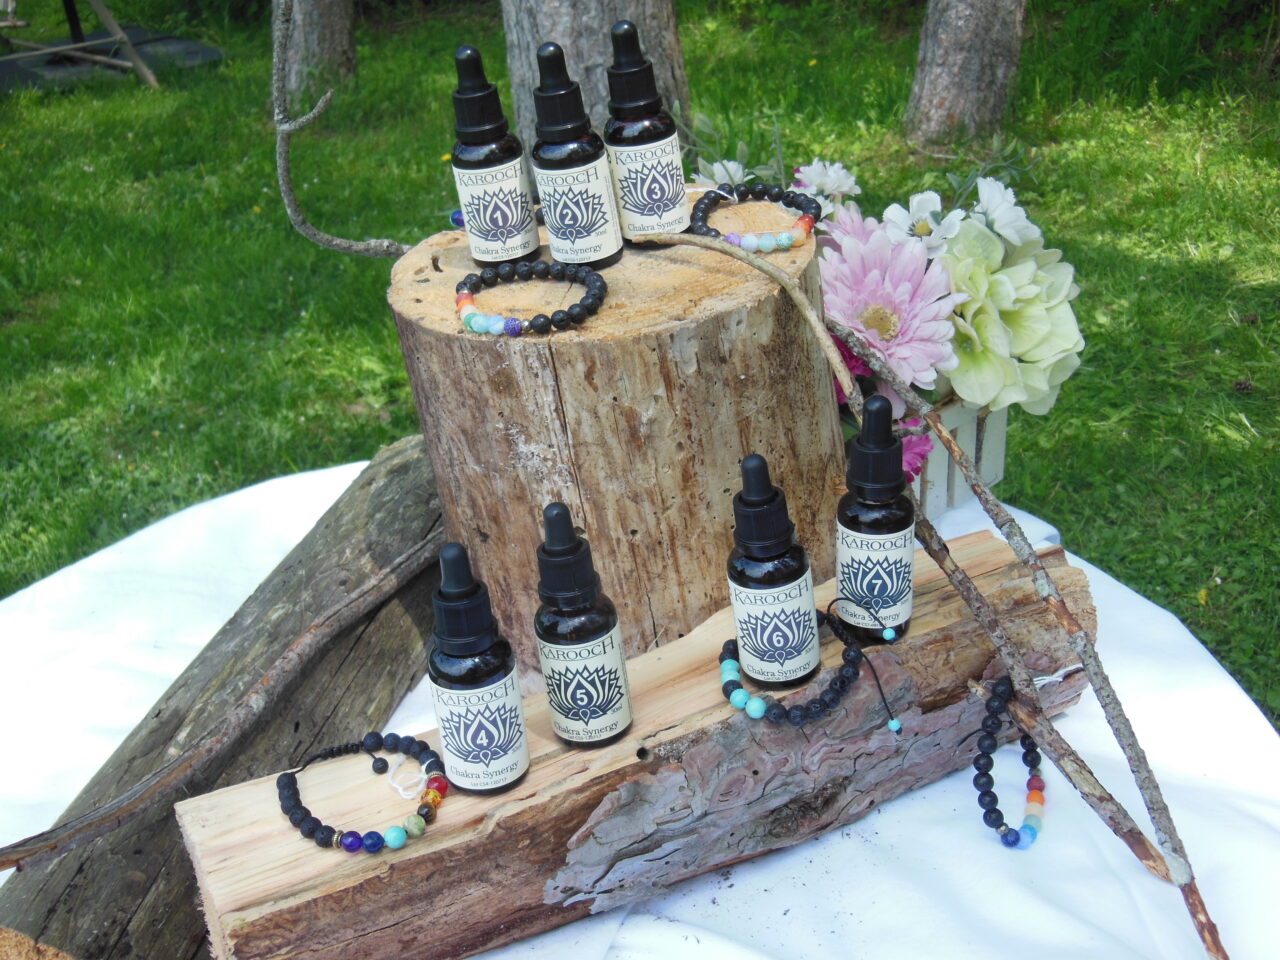 display of bracelets and bottles on rustic logs with flowers